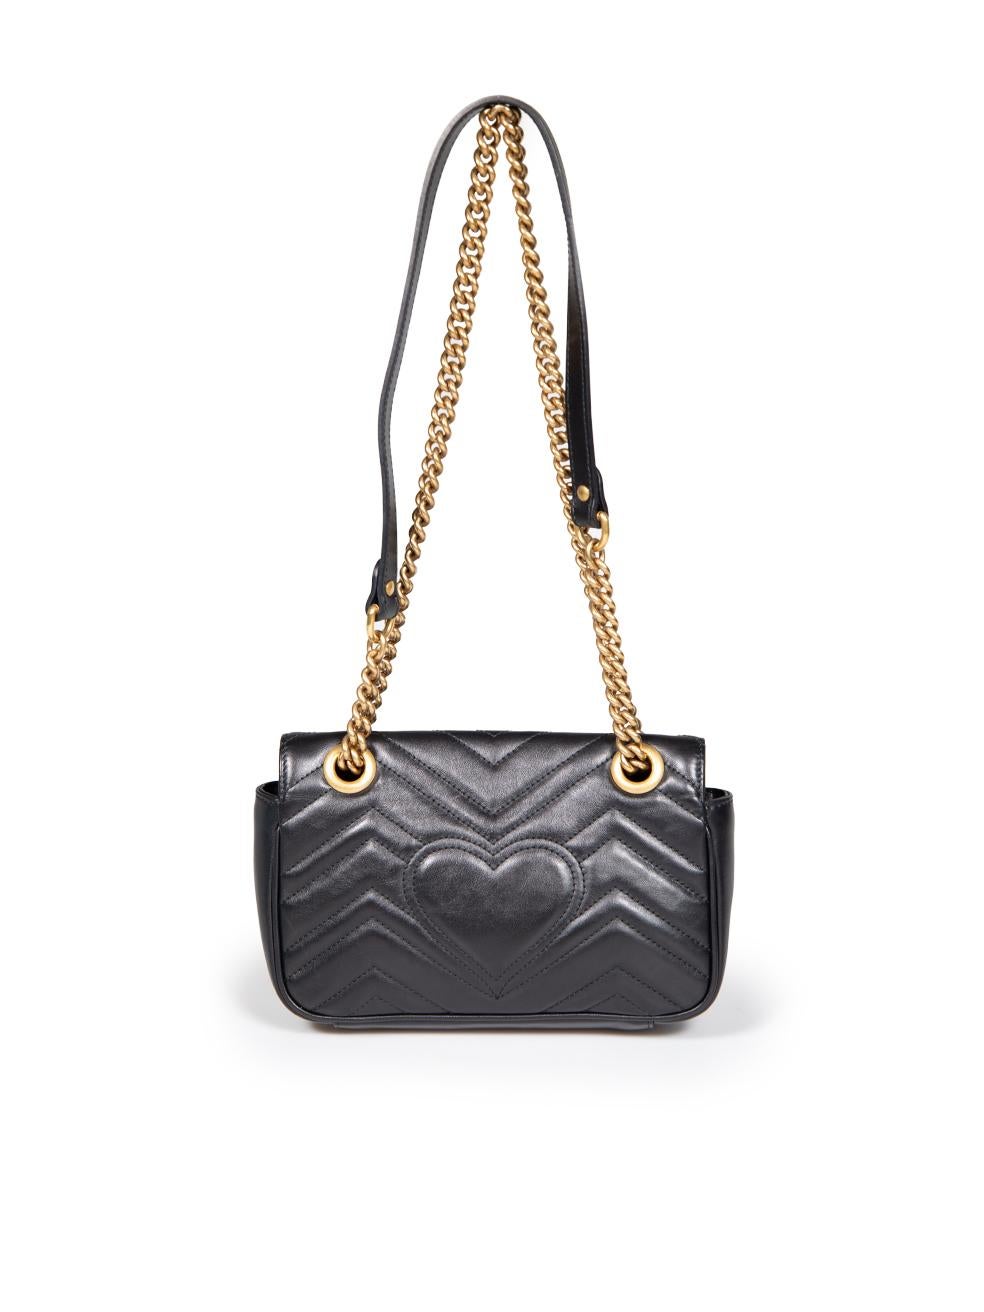 Gucci Black Leather Mini GG Marmont Crossbody Bag In Excellent Condition For Sale In London, GB